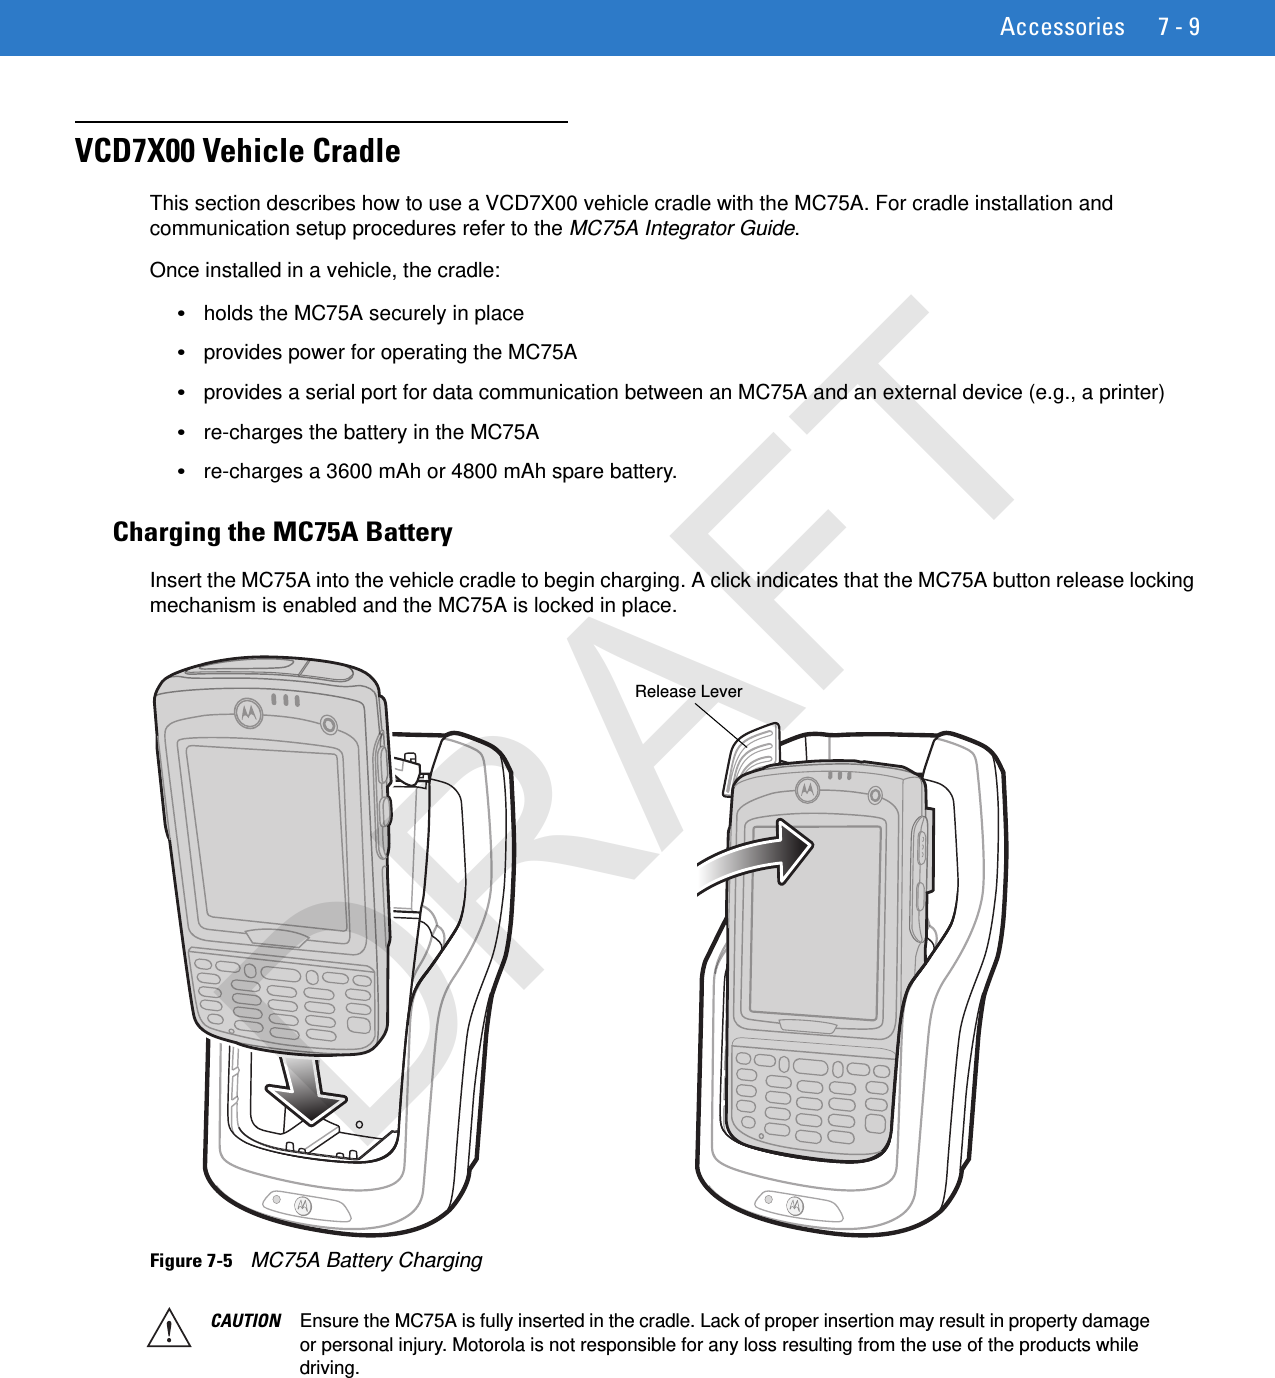 Accessories 7 - 9VCD7X00 Vehicle CradleThis section describes how to use a VCD7X00 vehicle cradle with the MC75A. For cradle installation and communication setup procedures refer to the MC75A Integrator Guide.Once installed in a vehicle, the cradle:•holds the MC75A securely in place•provides power for operating the MC75A•provides a serial port for data communication between an MC75A and an external device (e.g., a printer)•re-charges the battery in the MC75A•re-charges a 3600 mAh or 4800 mAh spare battery.Charging the MC75A BatteryInsert the MC75A into the vehicle cradle to begin charging. A click indicates that the MC75A button release locking mechanism is enabled and the MC75A is locked in place.Figure 7-5    MC75A Battery Charging Release LeverCAUTION Ensure the MC75A is fully inserted in the cradle. Lack of proper insertion may result in property damage or personal injury. Motorola is not responsible for any loss resulting from the use of the products while driving. DRAFT